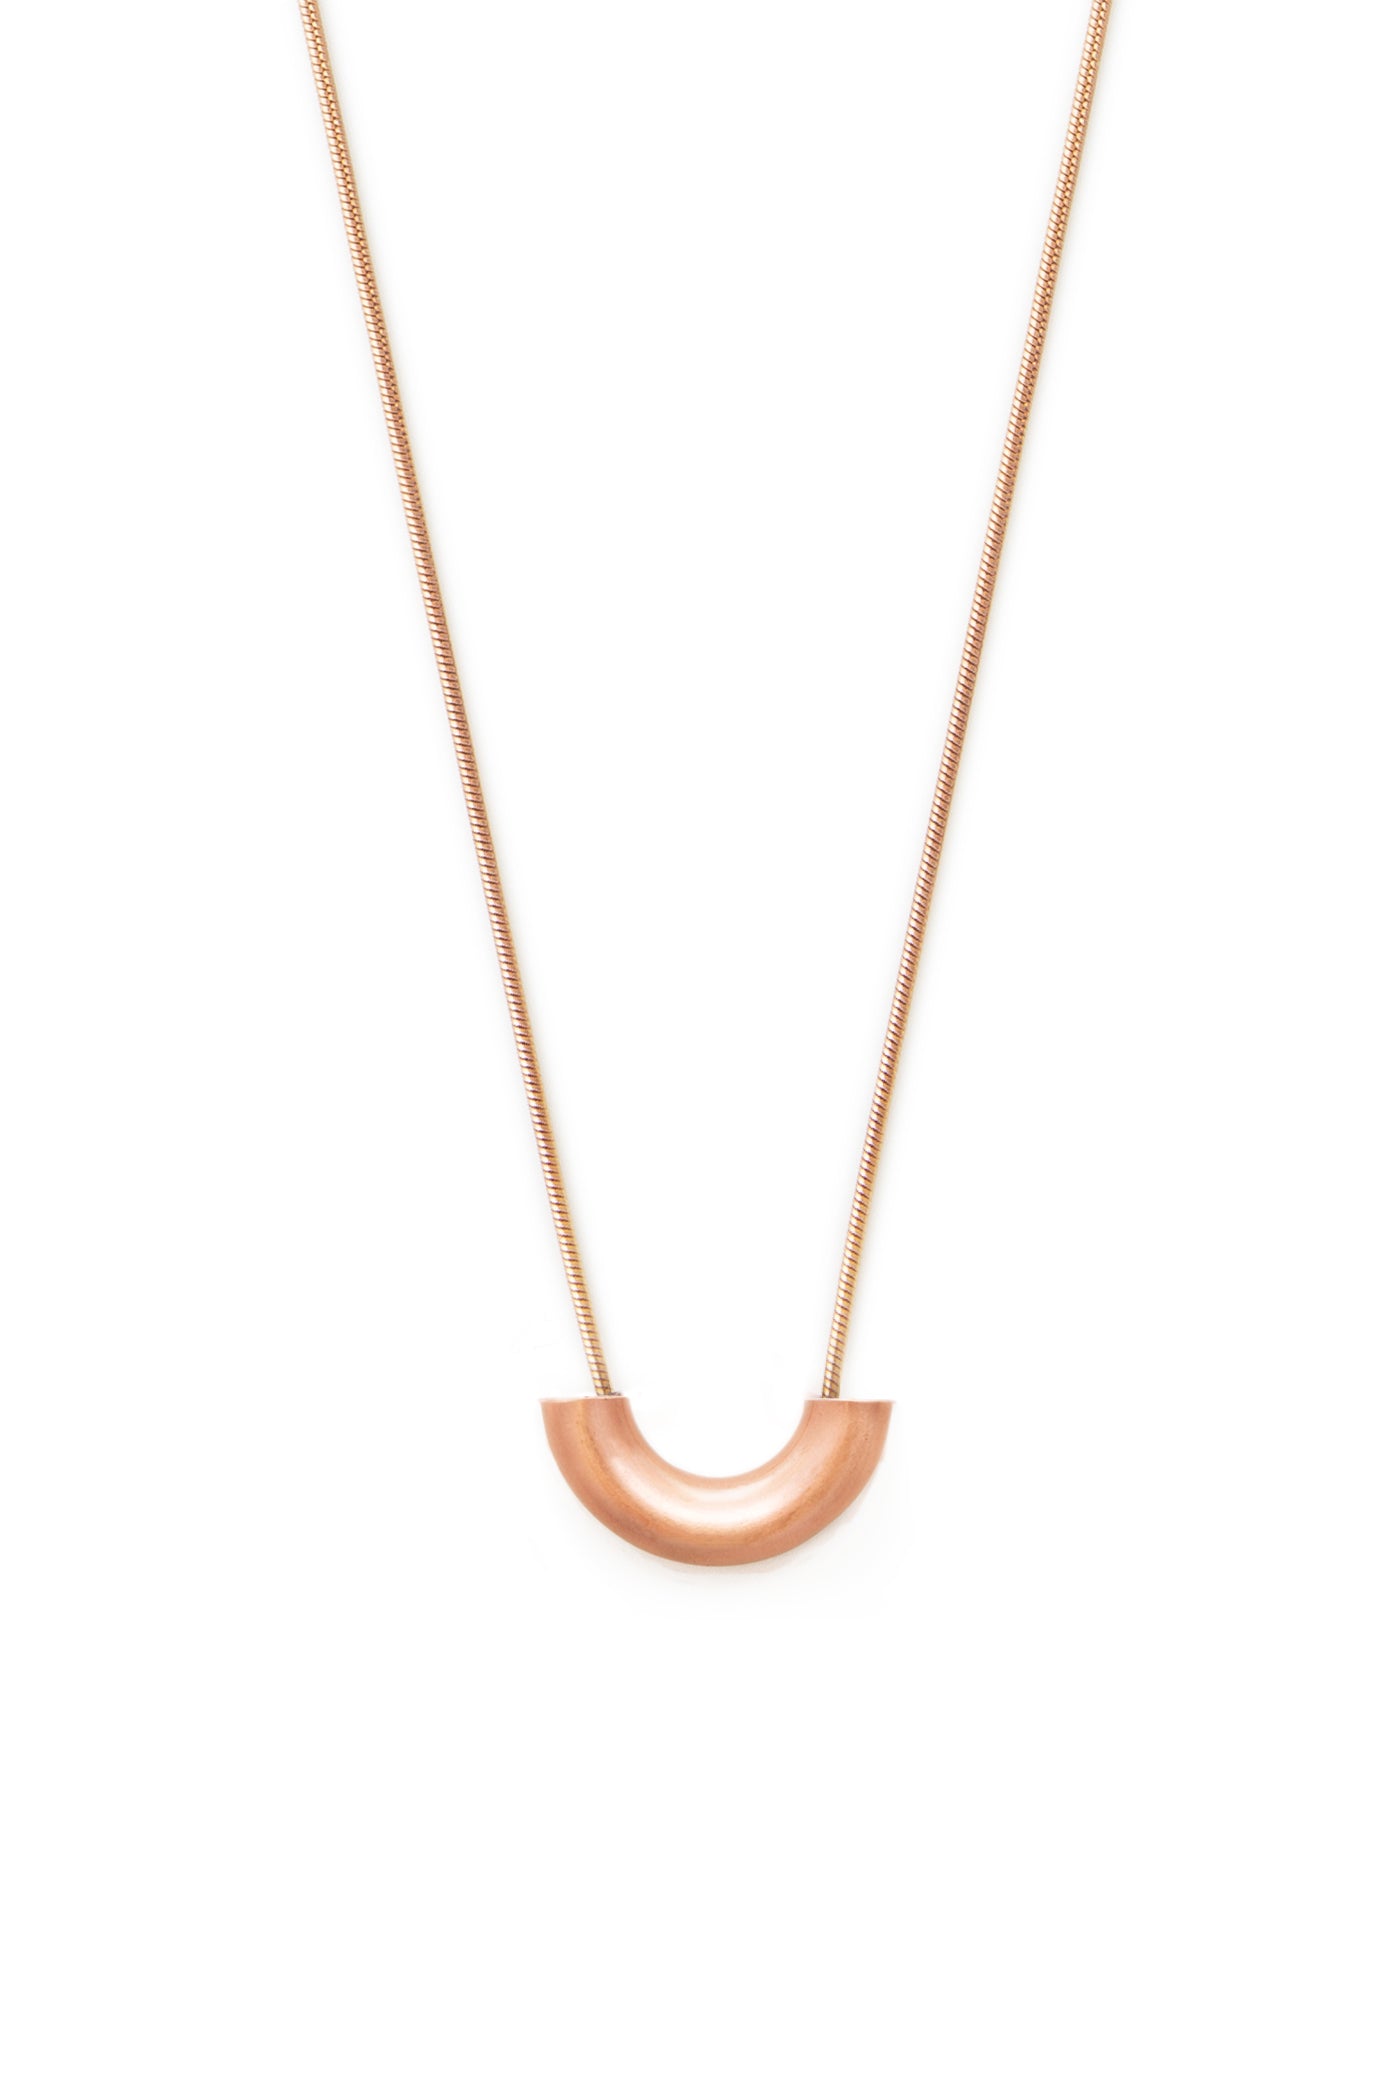 PIPA necklace N°1